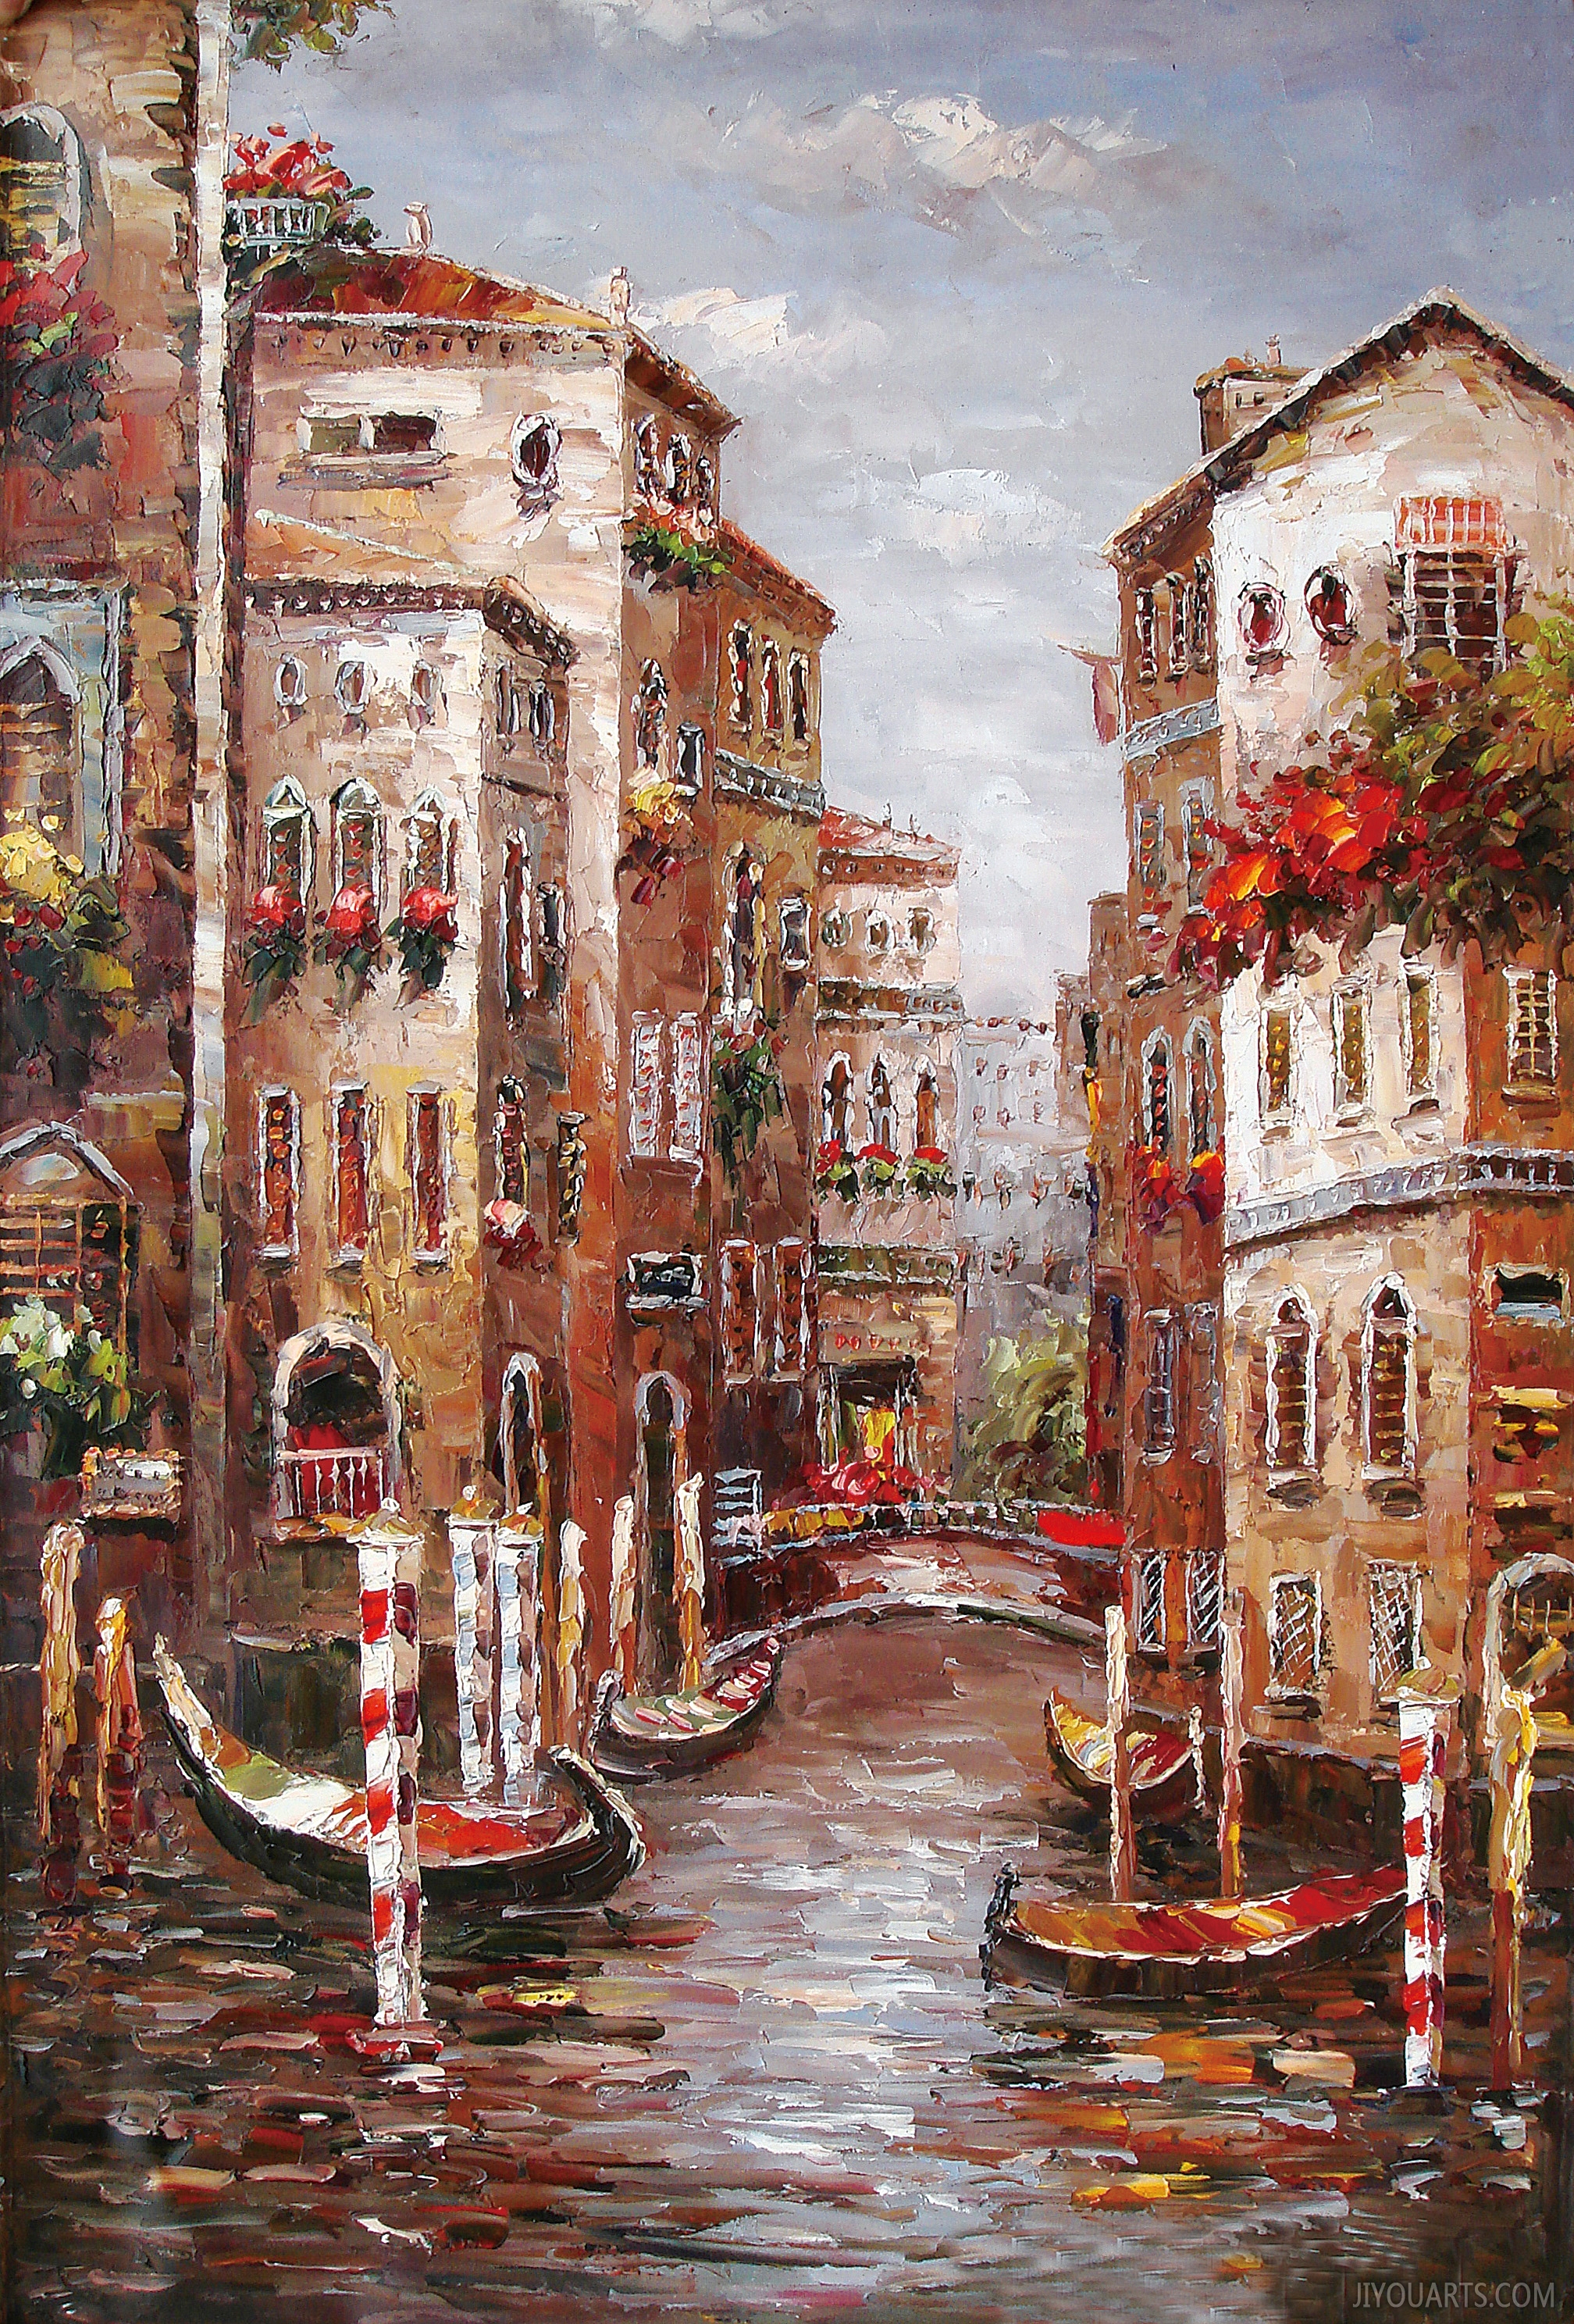 Venice Oil Painting 0001, scenic canal house, southern water towns, most beautiful waterways